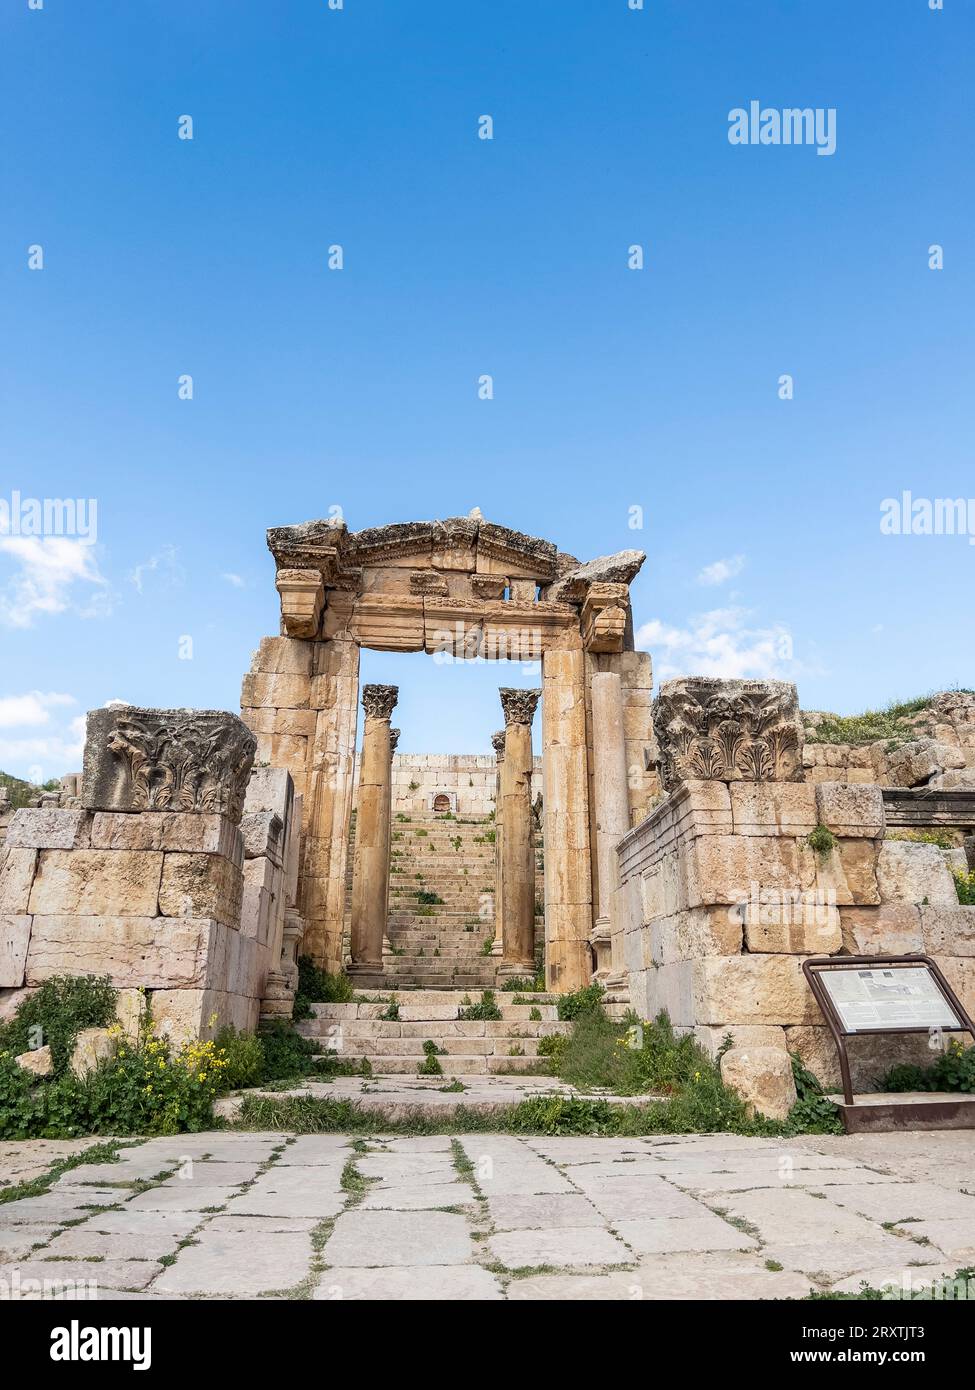 Columns in the ancient city of Jerash, believed to be founded in 331 BC by Alexander the Great, Jerash, Jordan, Middle East Stock Photo